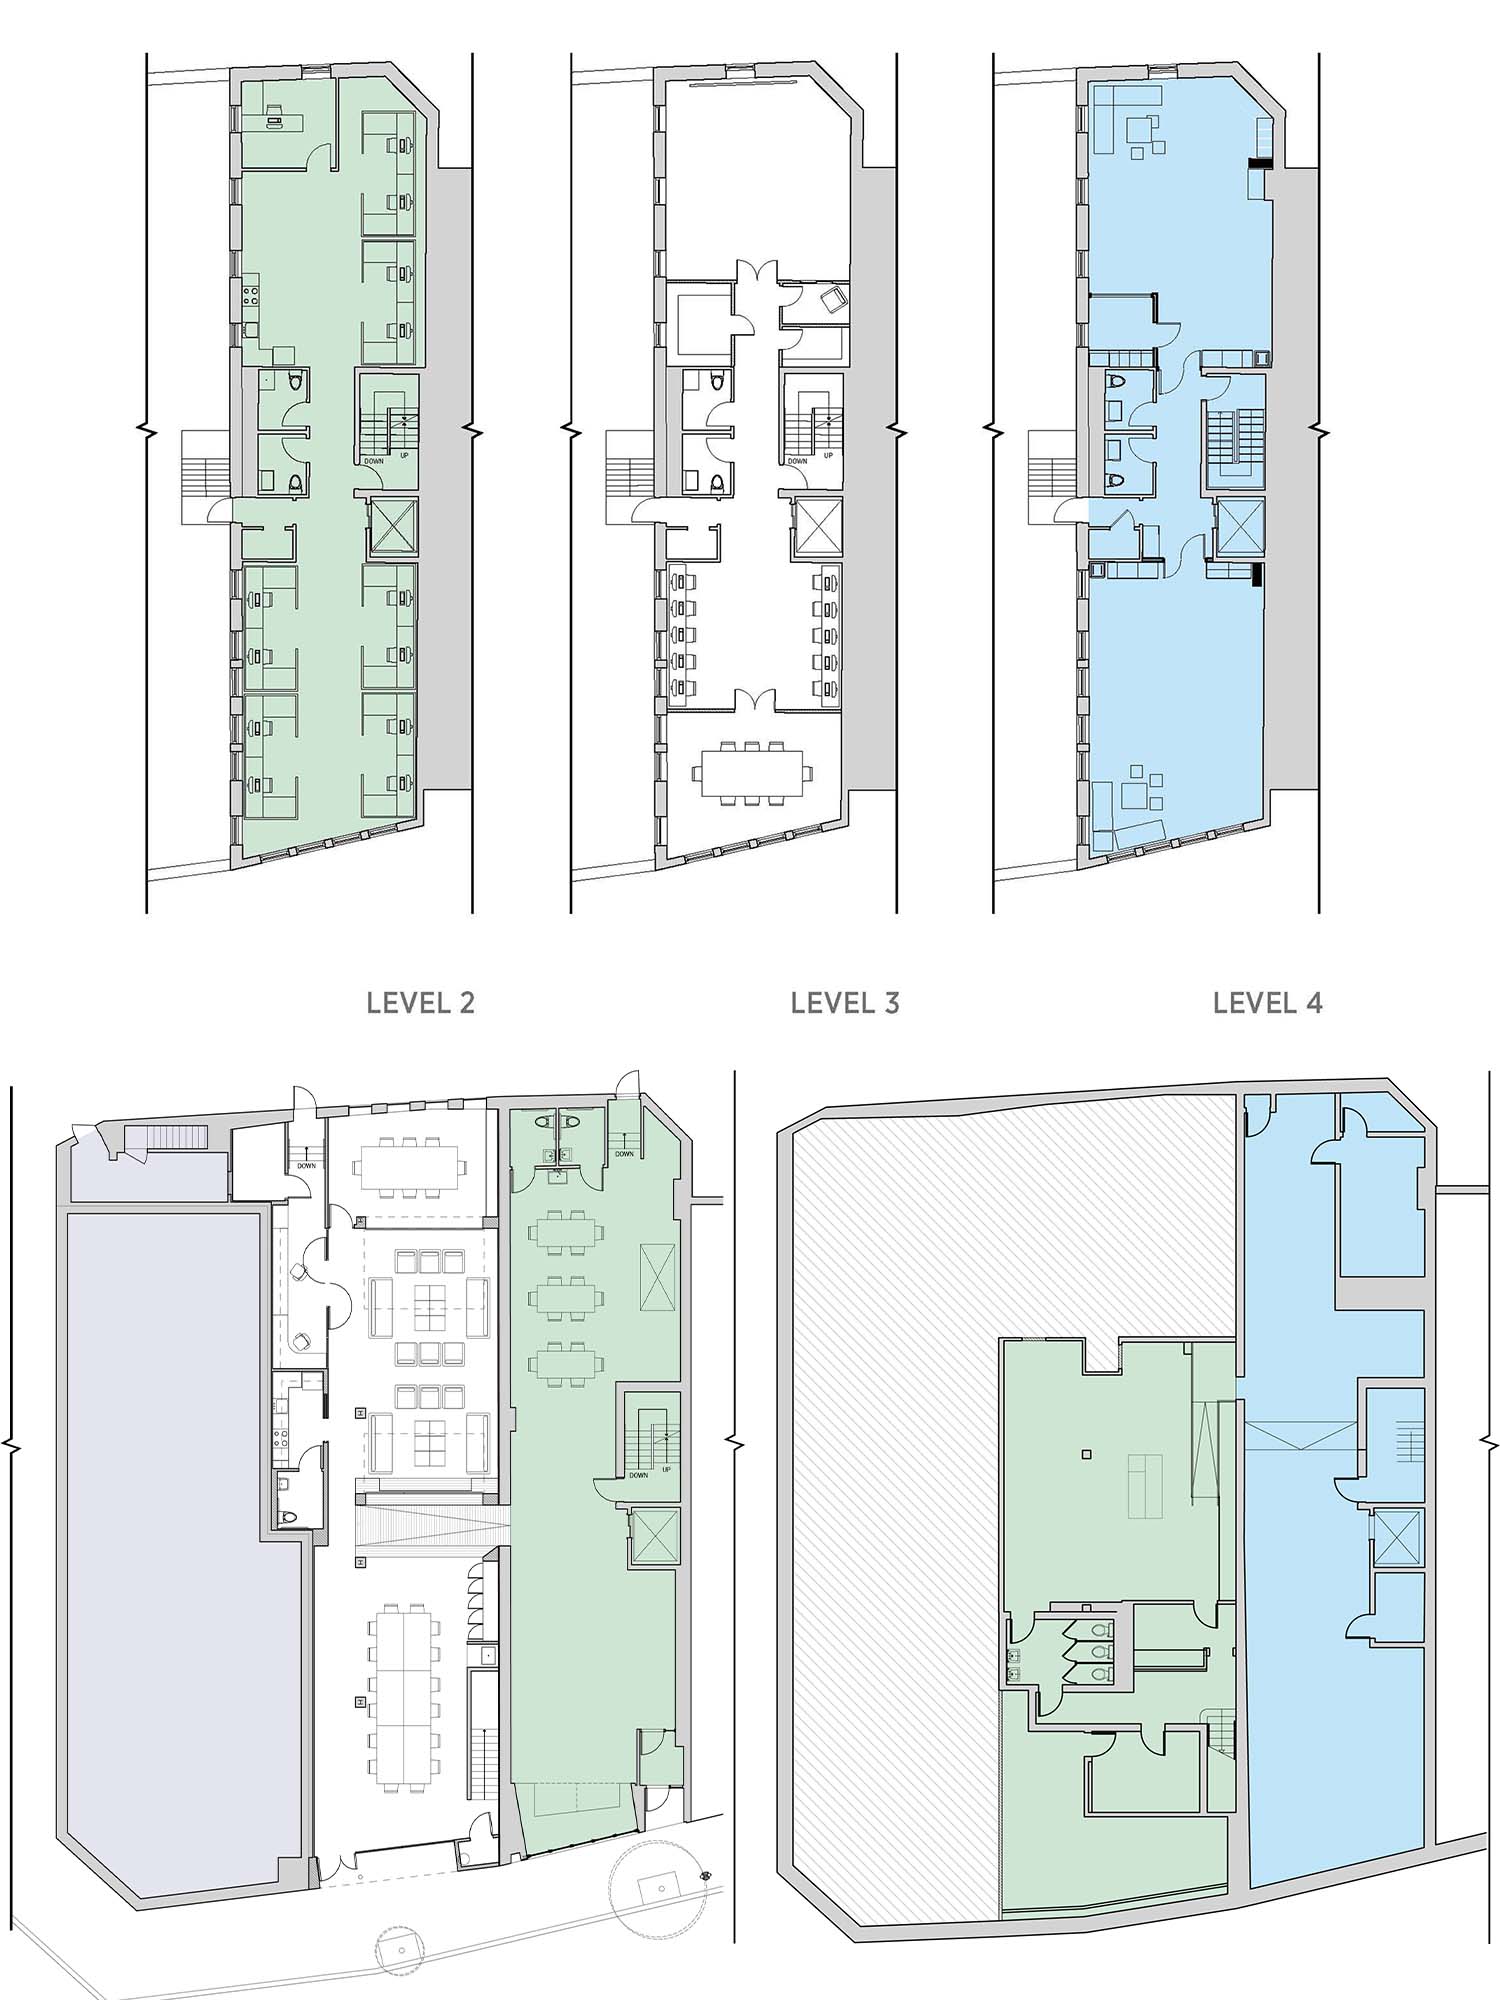 basement and floor plan 1, 2, 3 and 4 